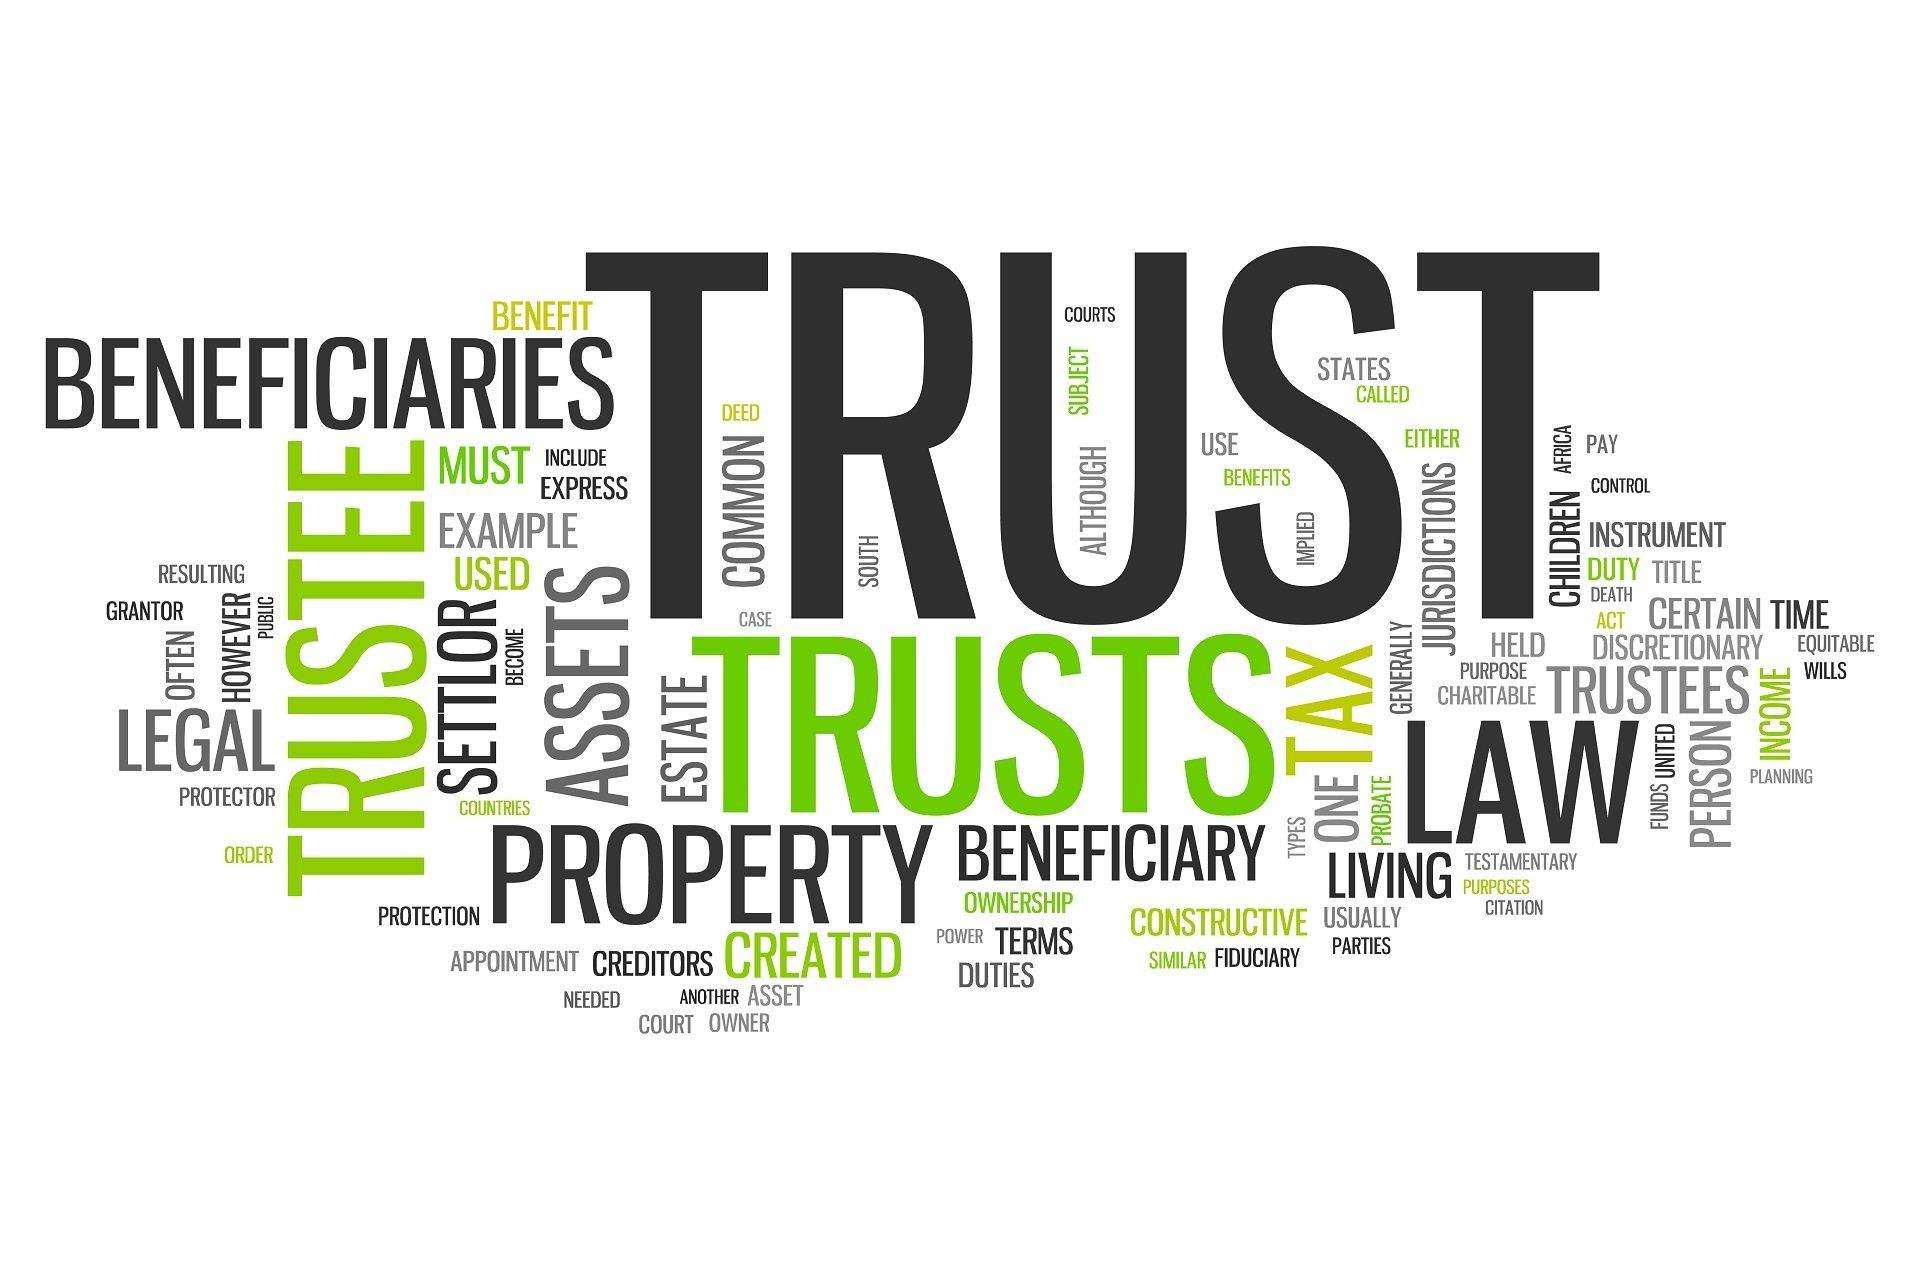 Revocable vs. Irrevocable Trusts: Advantages and Disadvantages